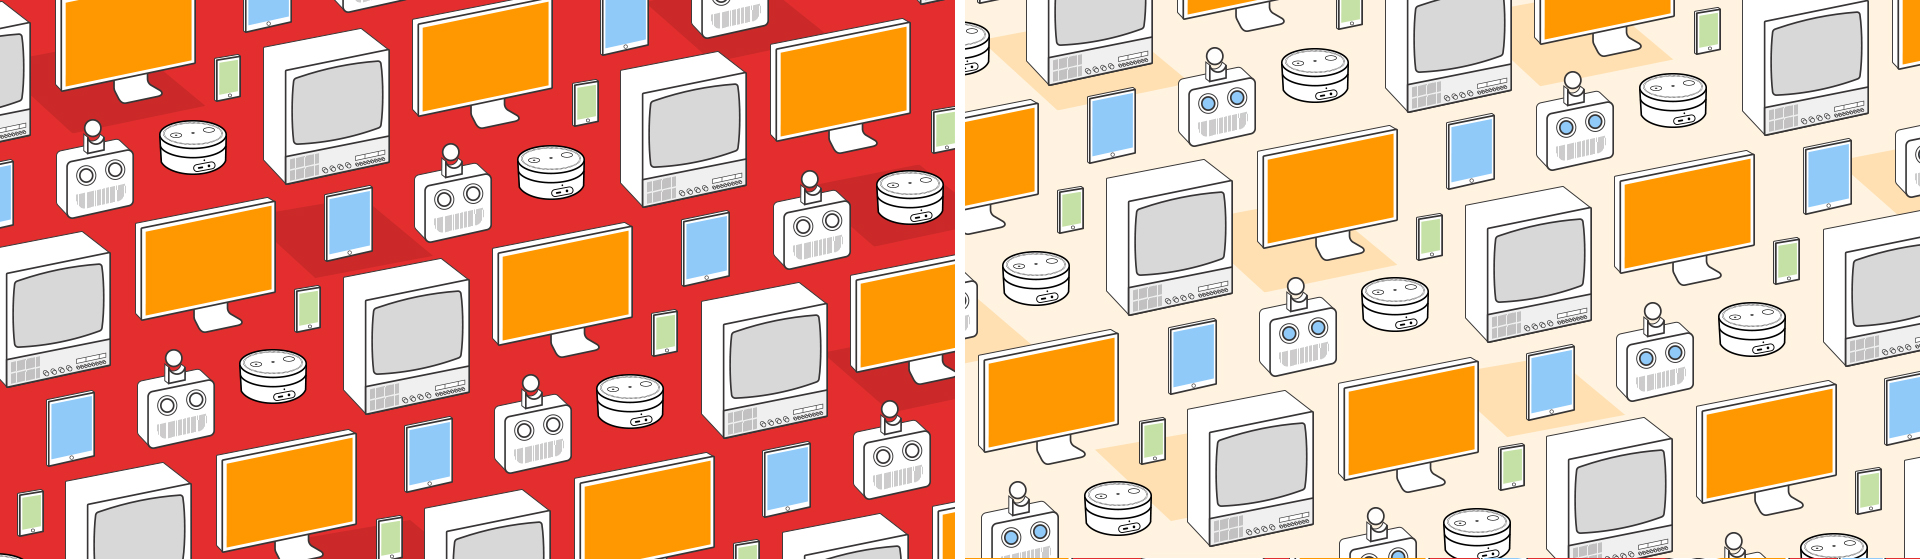 Two versions of the Alley repeating pattern, with robots, television screens, computers, Amazon Alexas, and smart devices overlaid on a red, and separate a pale orange background